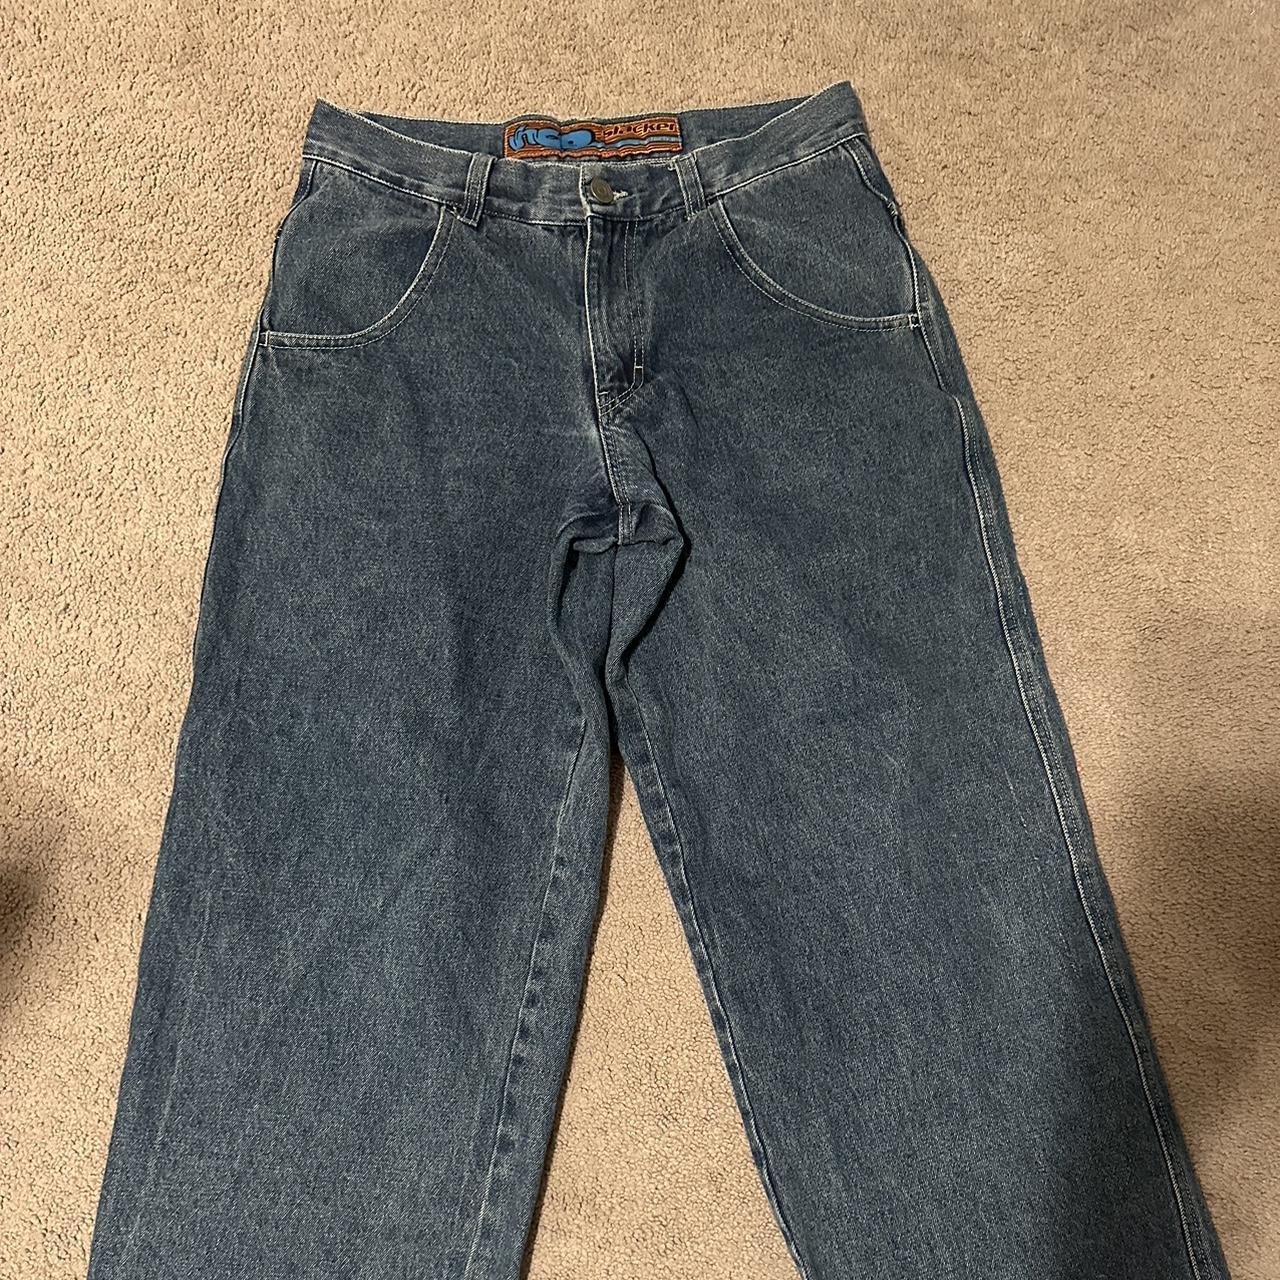 Jnco Slackers 32W 32in Fits great Relisted cause i... - Depop